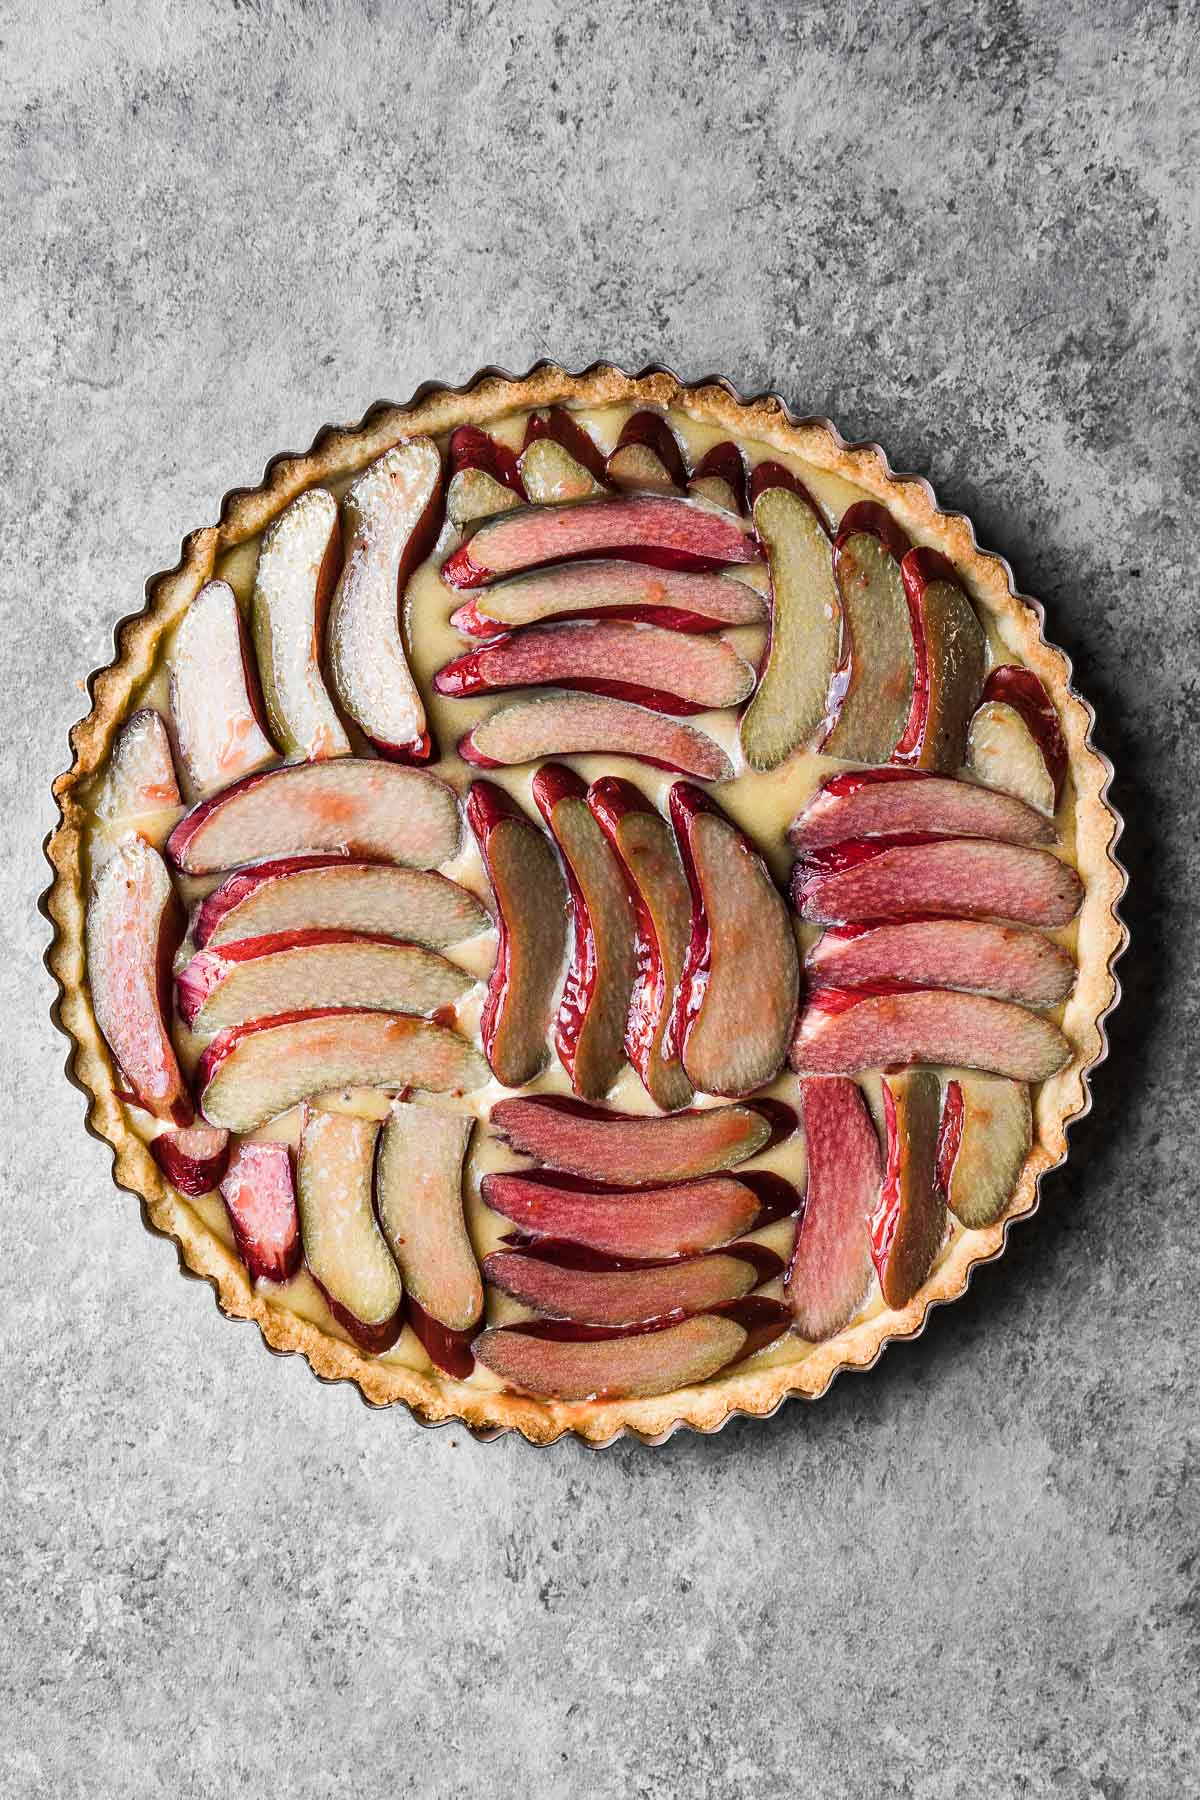 Unbaked tart filled with frangipane and topped with sliced rhubarb arranged in a parquet pattern.